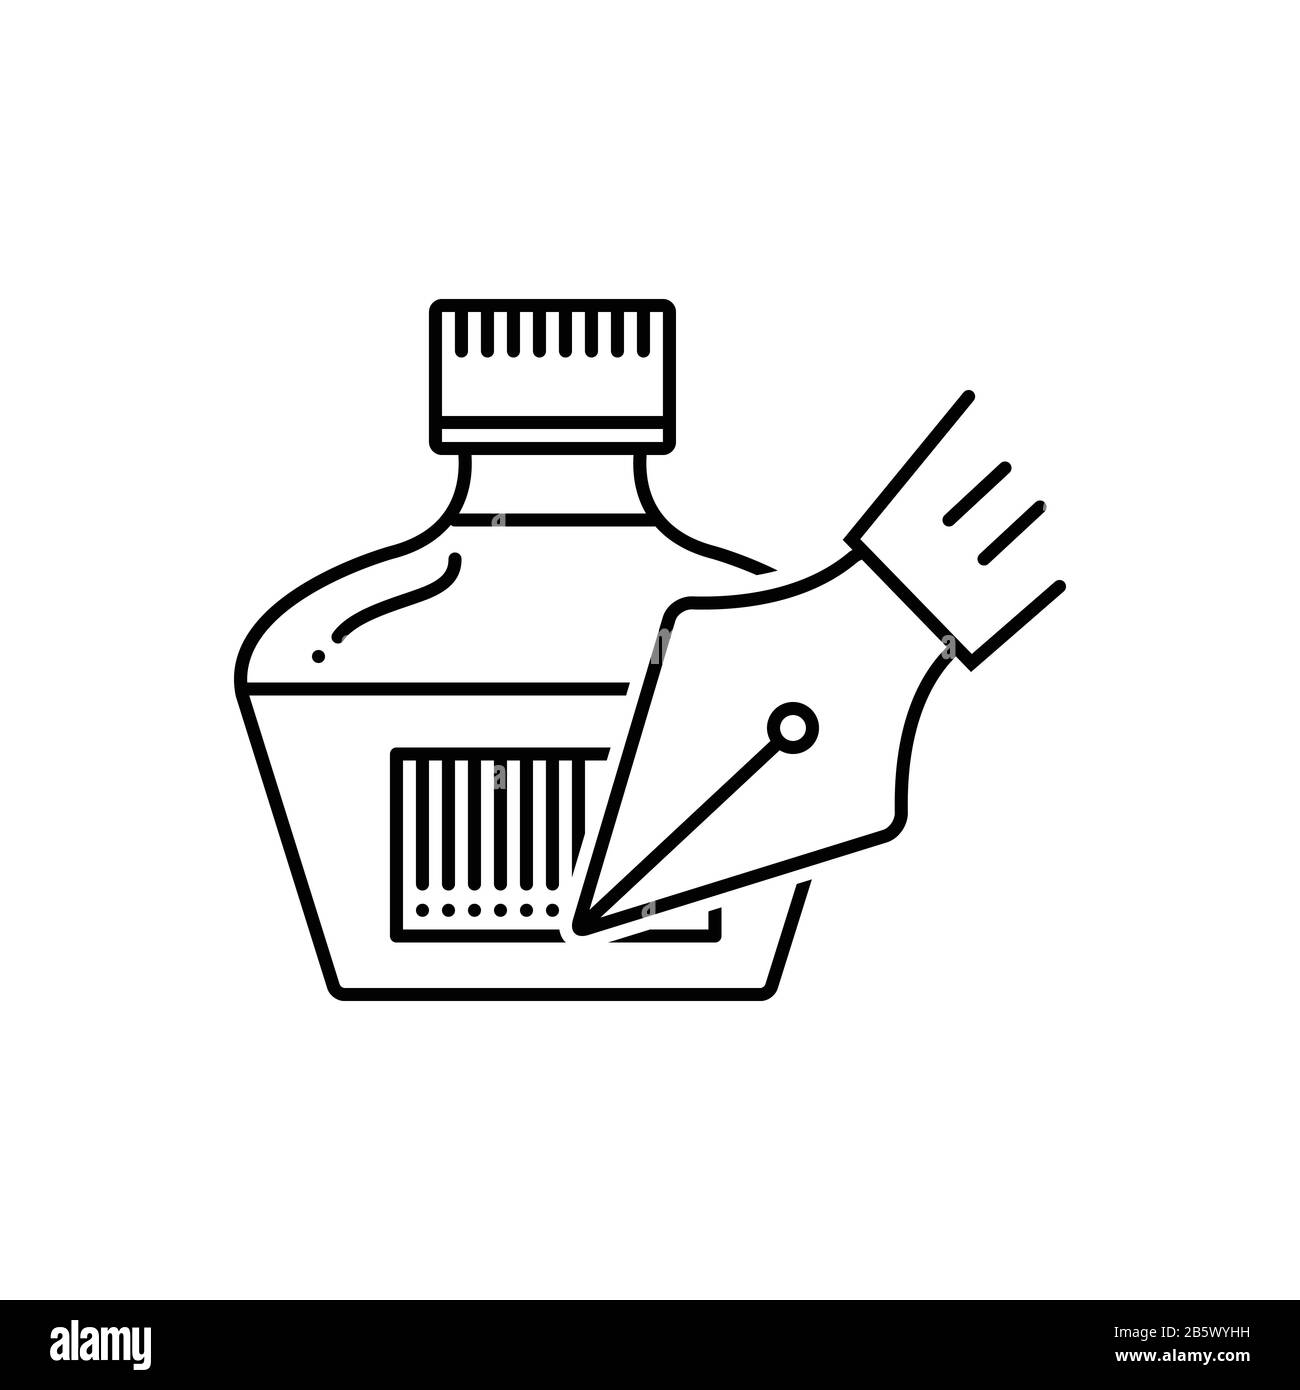 inkpot coloring page